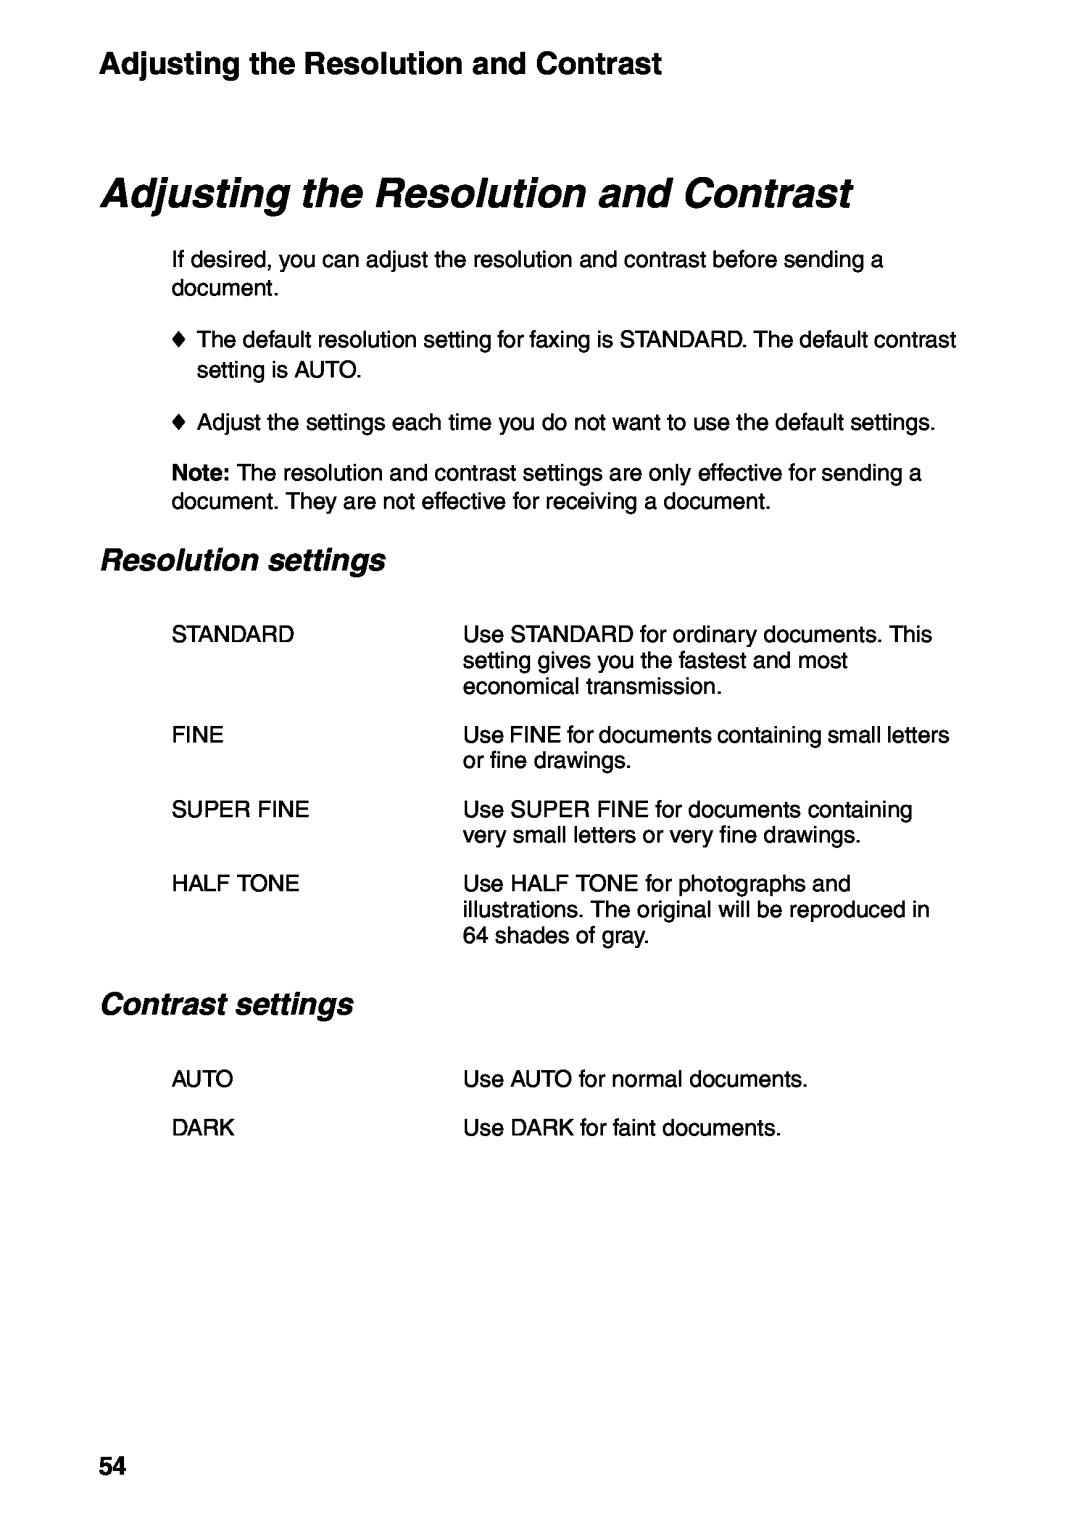 Sharp FO-IS115N operation manual Adjusting the Resolution and Contrast, Resolution settings, Contrast settings 